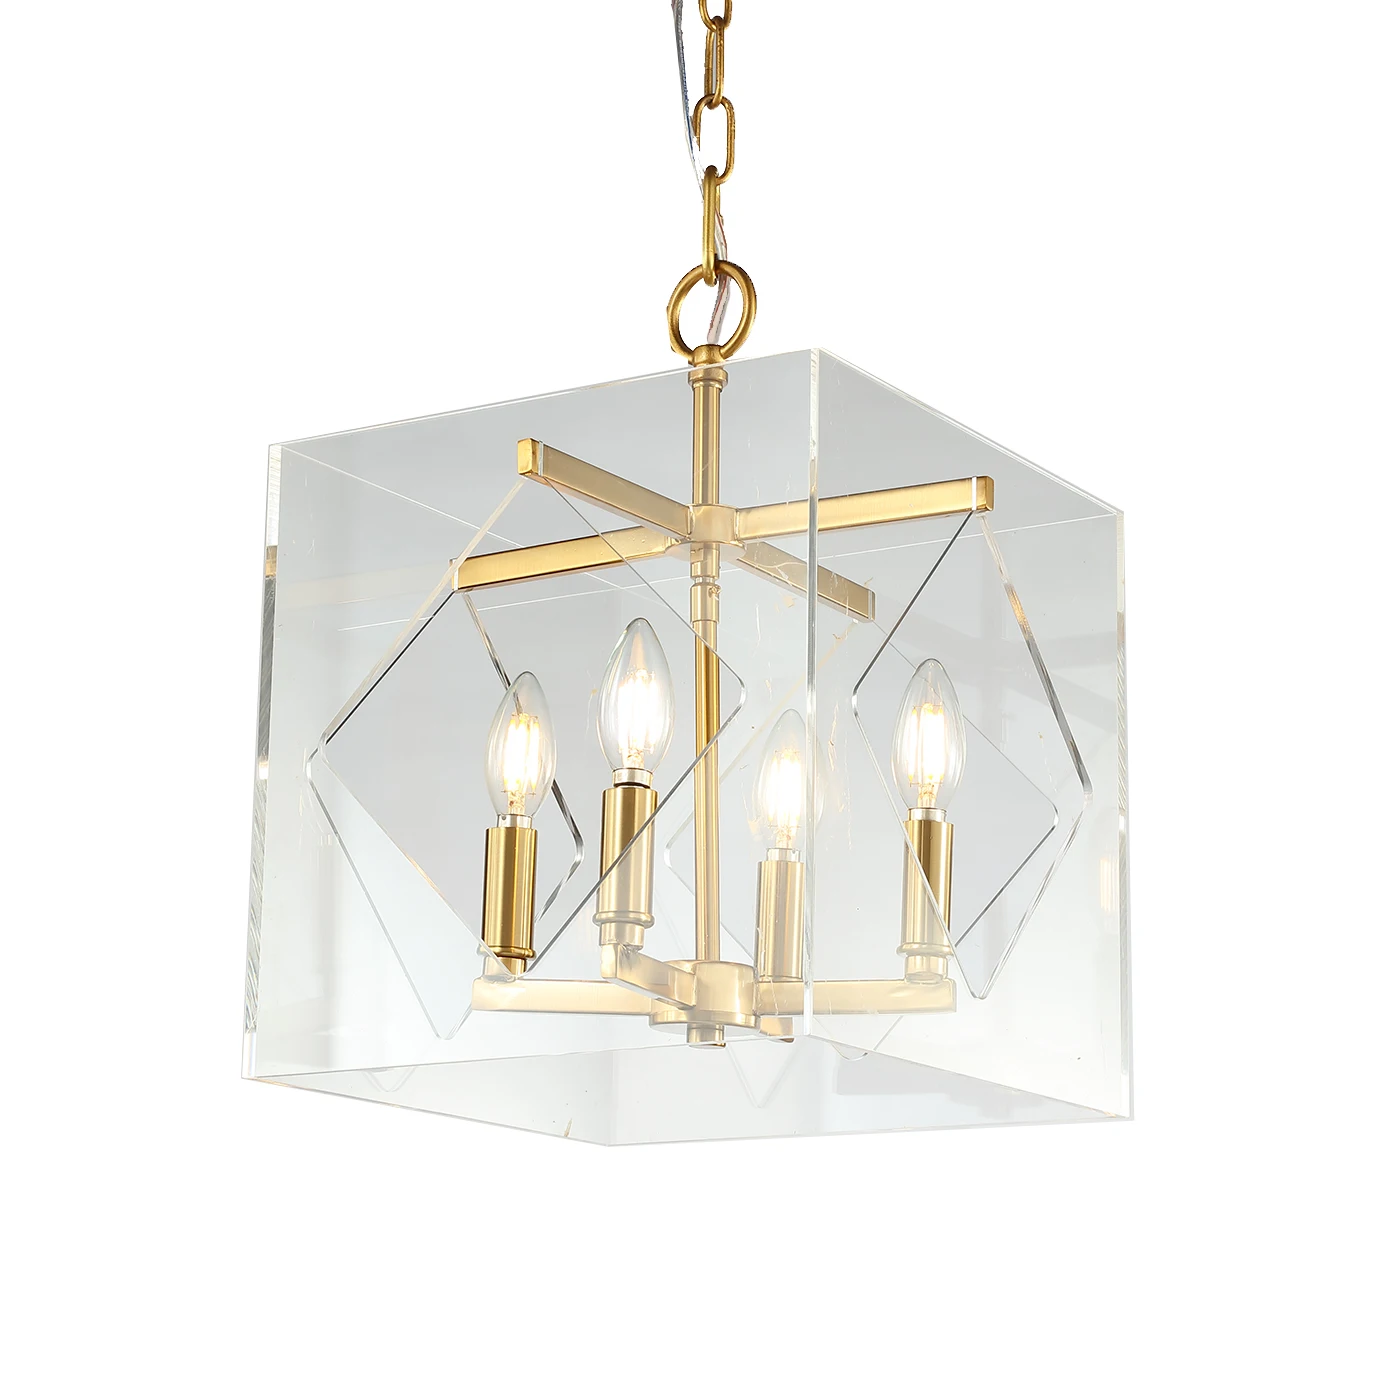 2020 New Modern Nordic Style Acrylic Iron Pendant Lamp with Brass Finish Small Size Rectangle Box Pendant Light for Home Decor